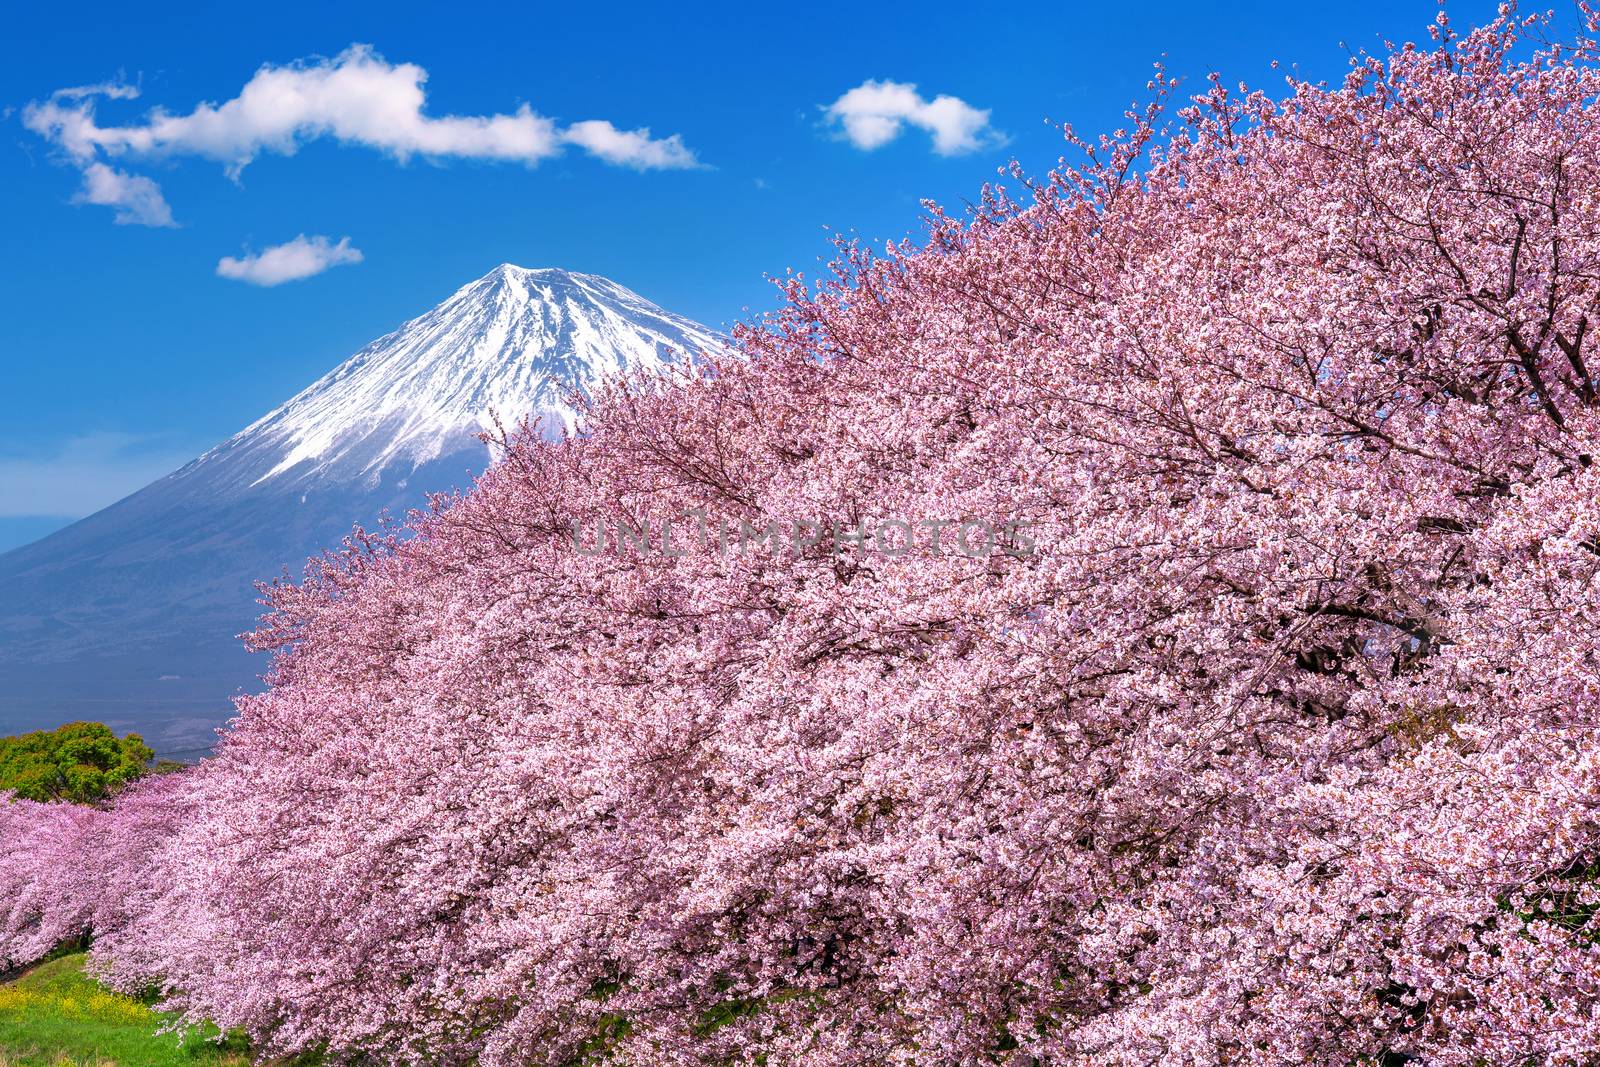 Fuji mountains and  cherry blossoms in spring, Japan. by gutarphotoghaphy